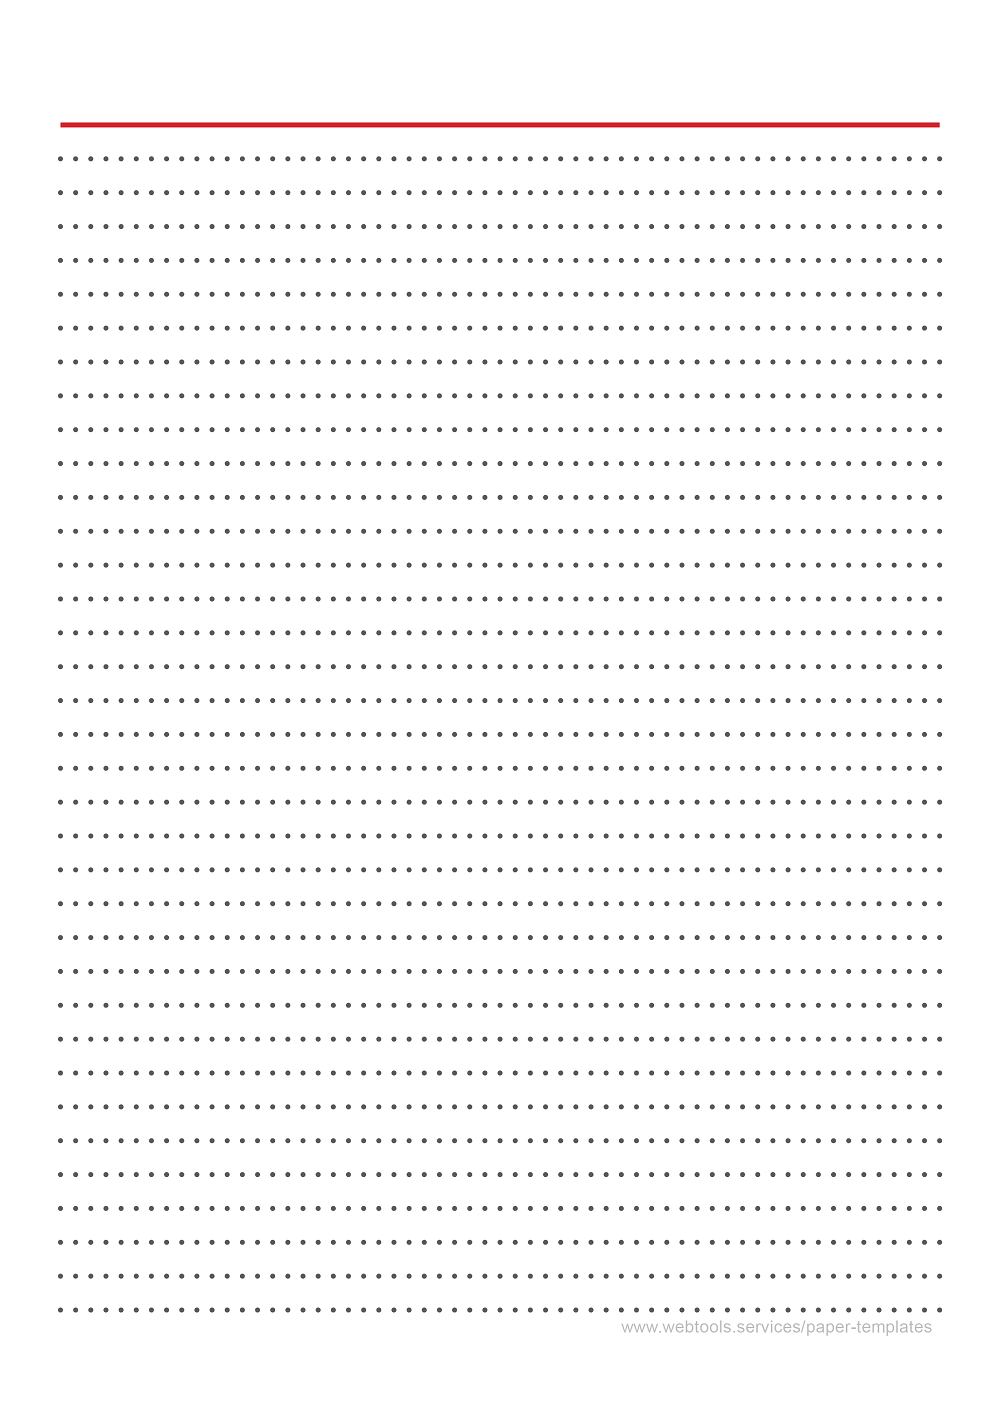 Black Dotted Line Writing Paper Template With Horizontal Red Margin And 7_1mm Line Height